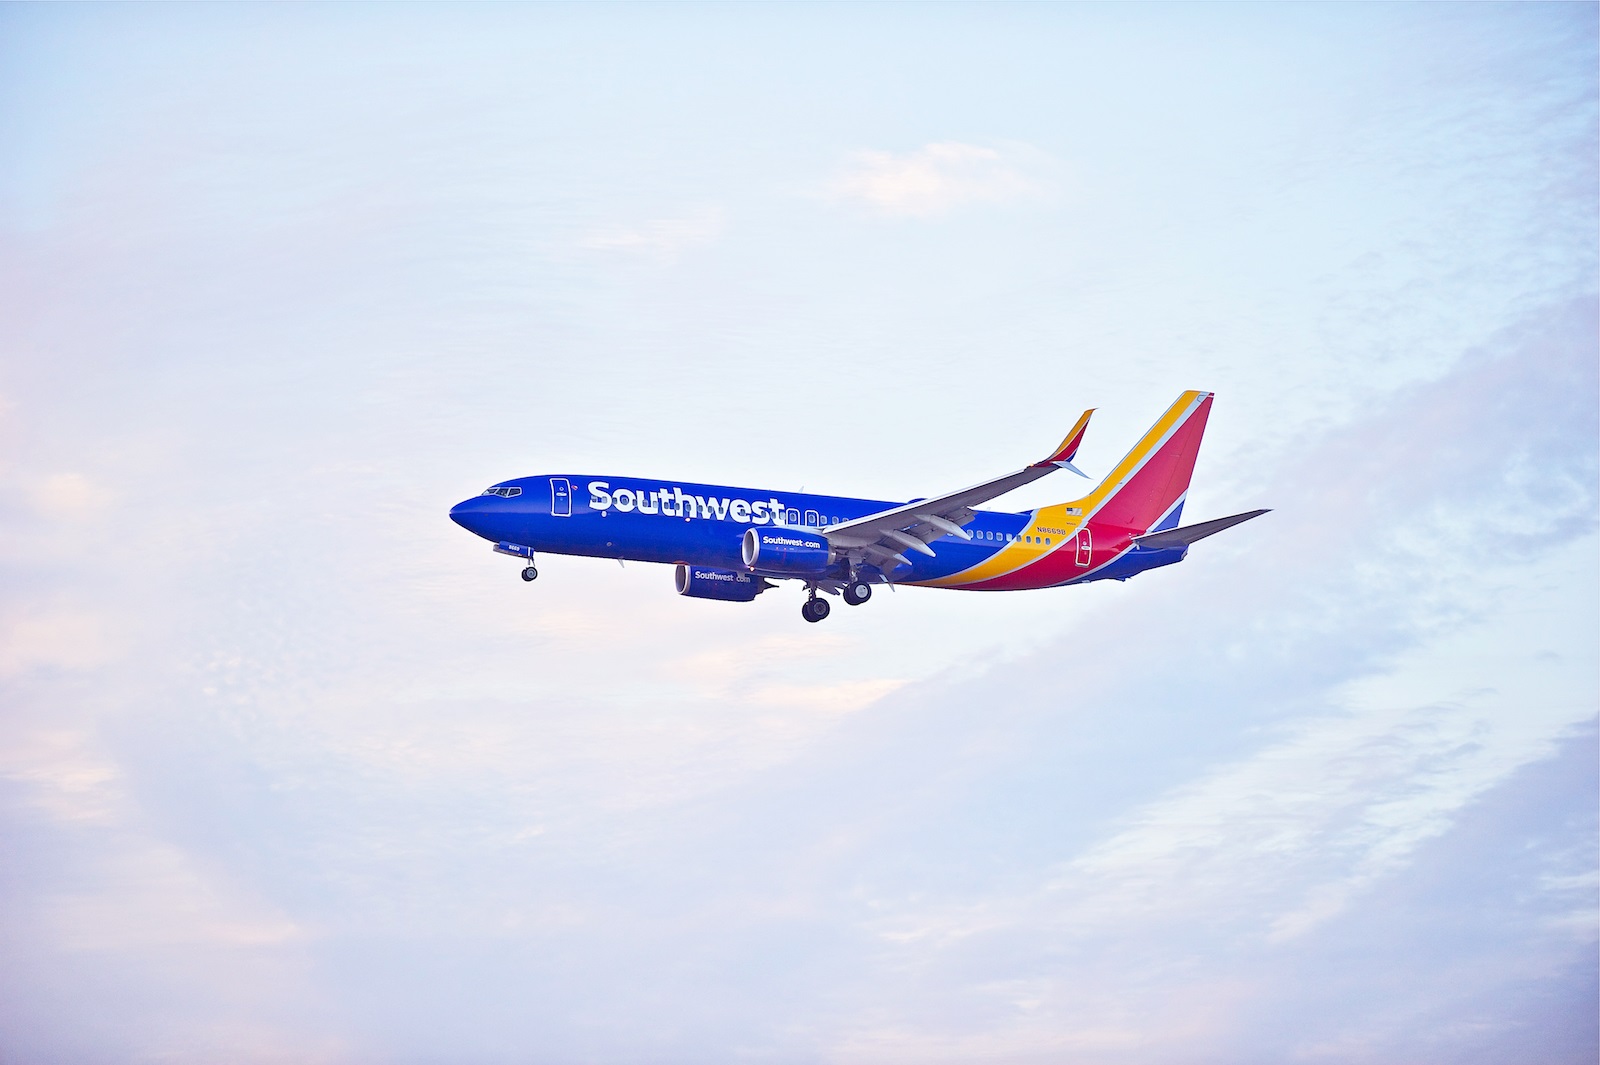 Same-Day Standby: Using Southwest Airlines’ Standby Policy to Make Last-Minute Travel Changes